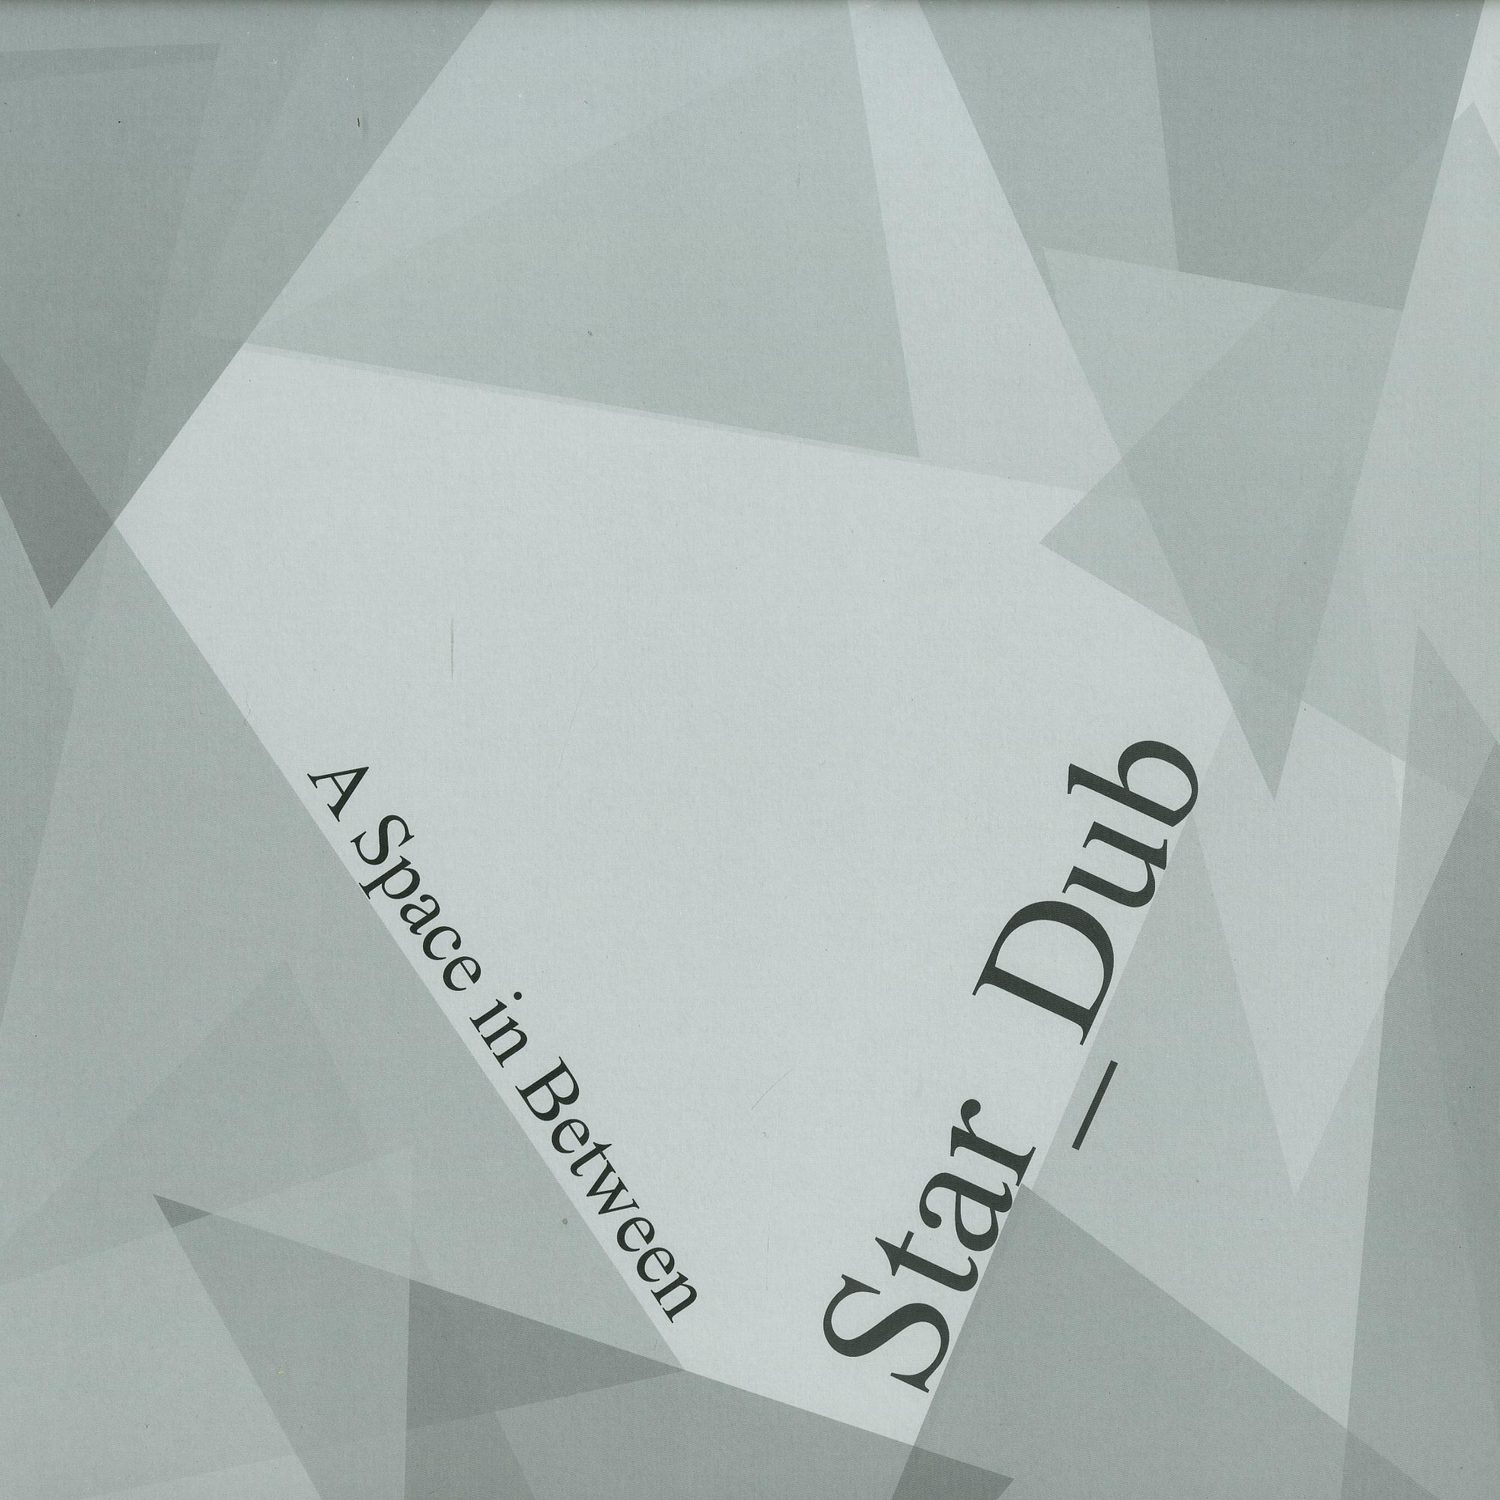 Star Dub - A SPACE IN BETWEEN 